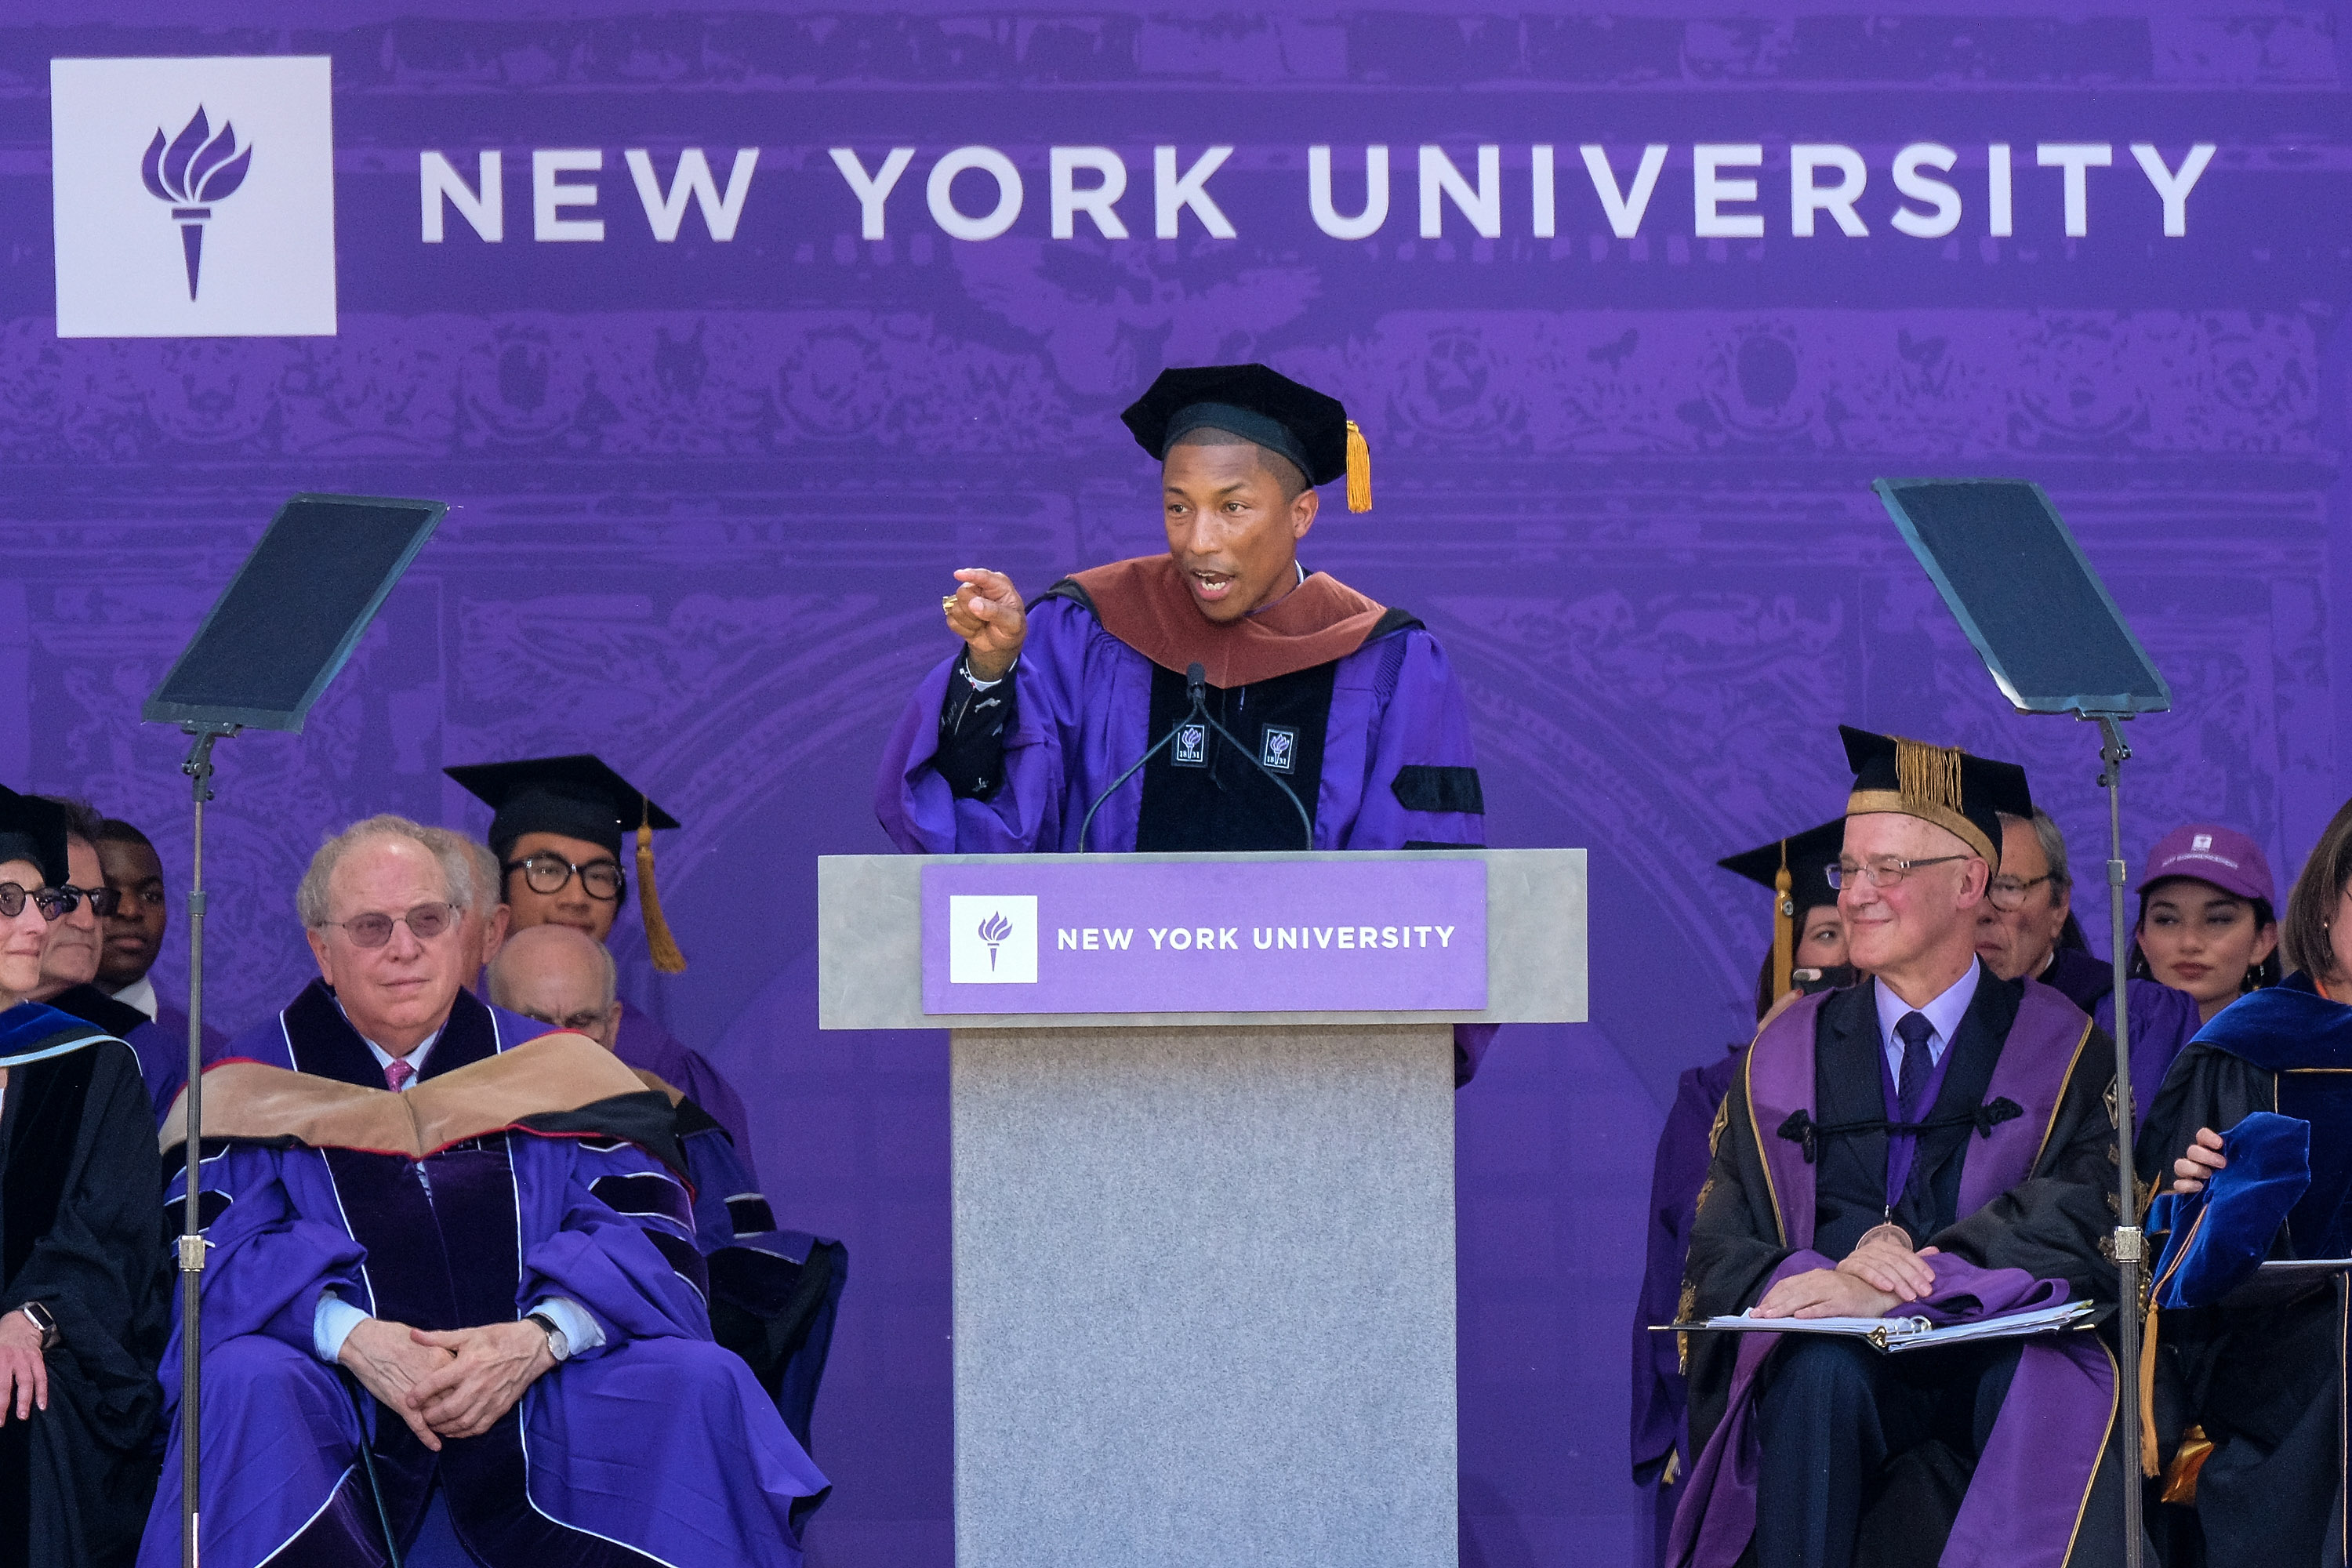 NEW YORK, NY - MAY 17:  Pharrell Williams speaks during the New York University 2017 Commencement at Yankee Stadium on May 17, 2017 in the Bronx borough of New York City.  (Photo by Dia Dipasupil/Getty Images) (Dia Dipasupil—Getty Images)